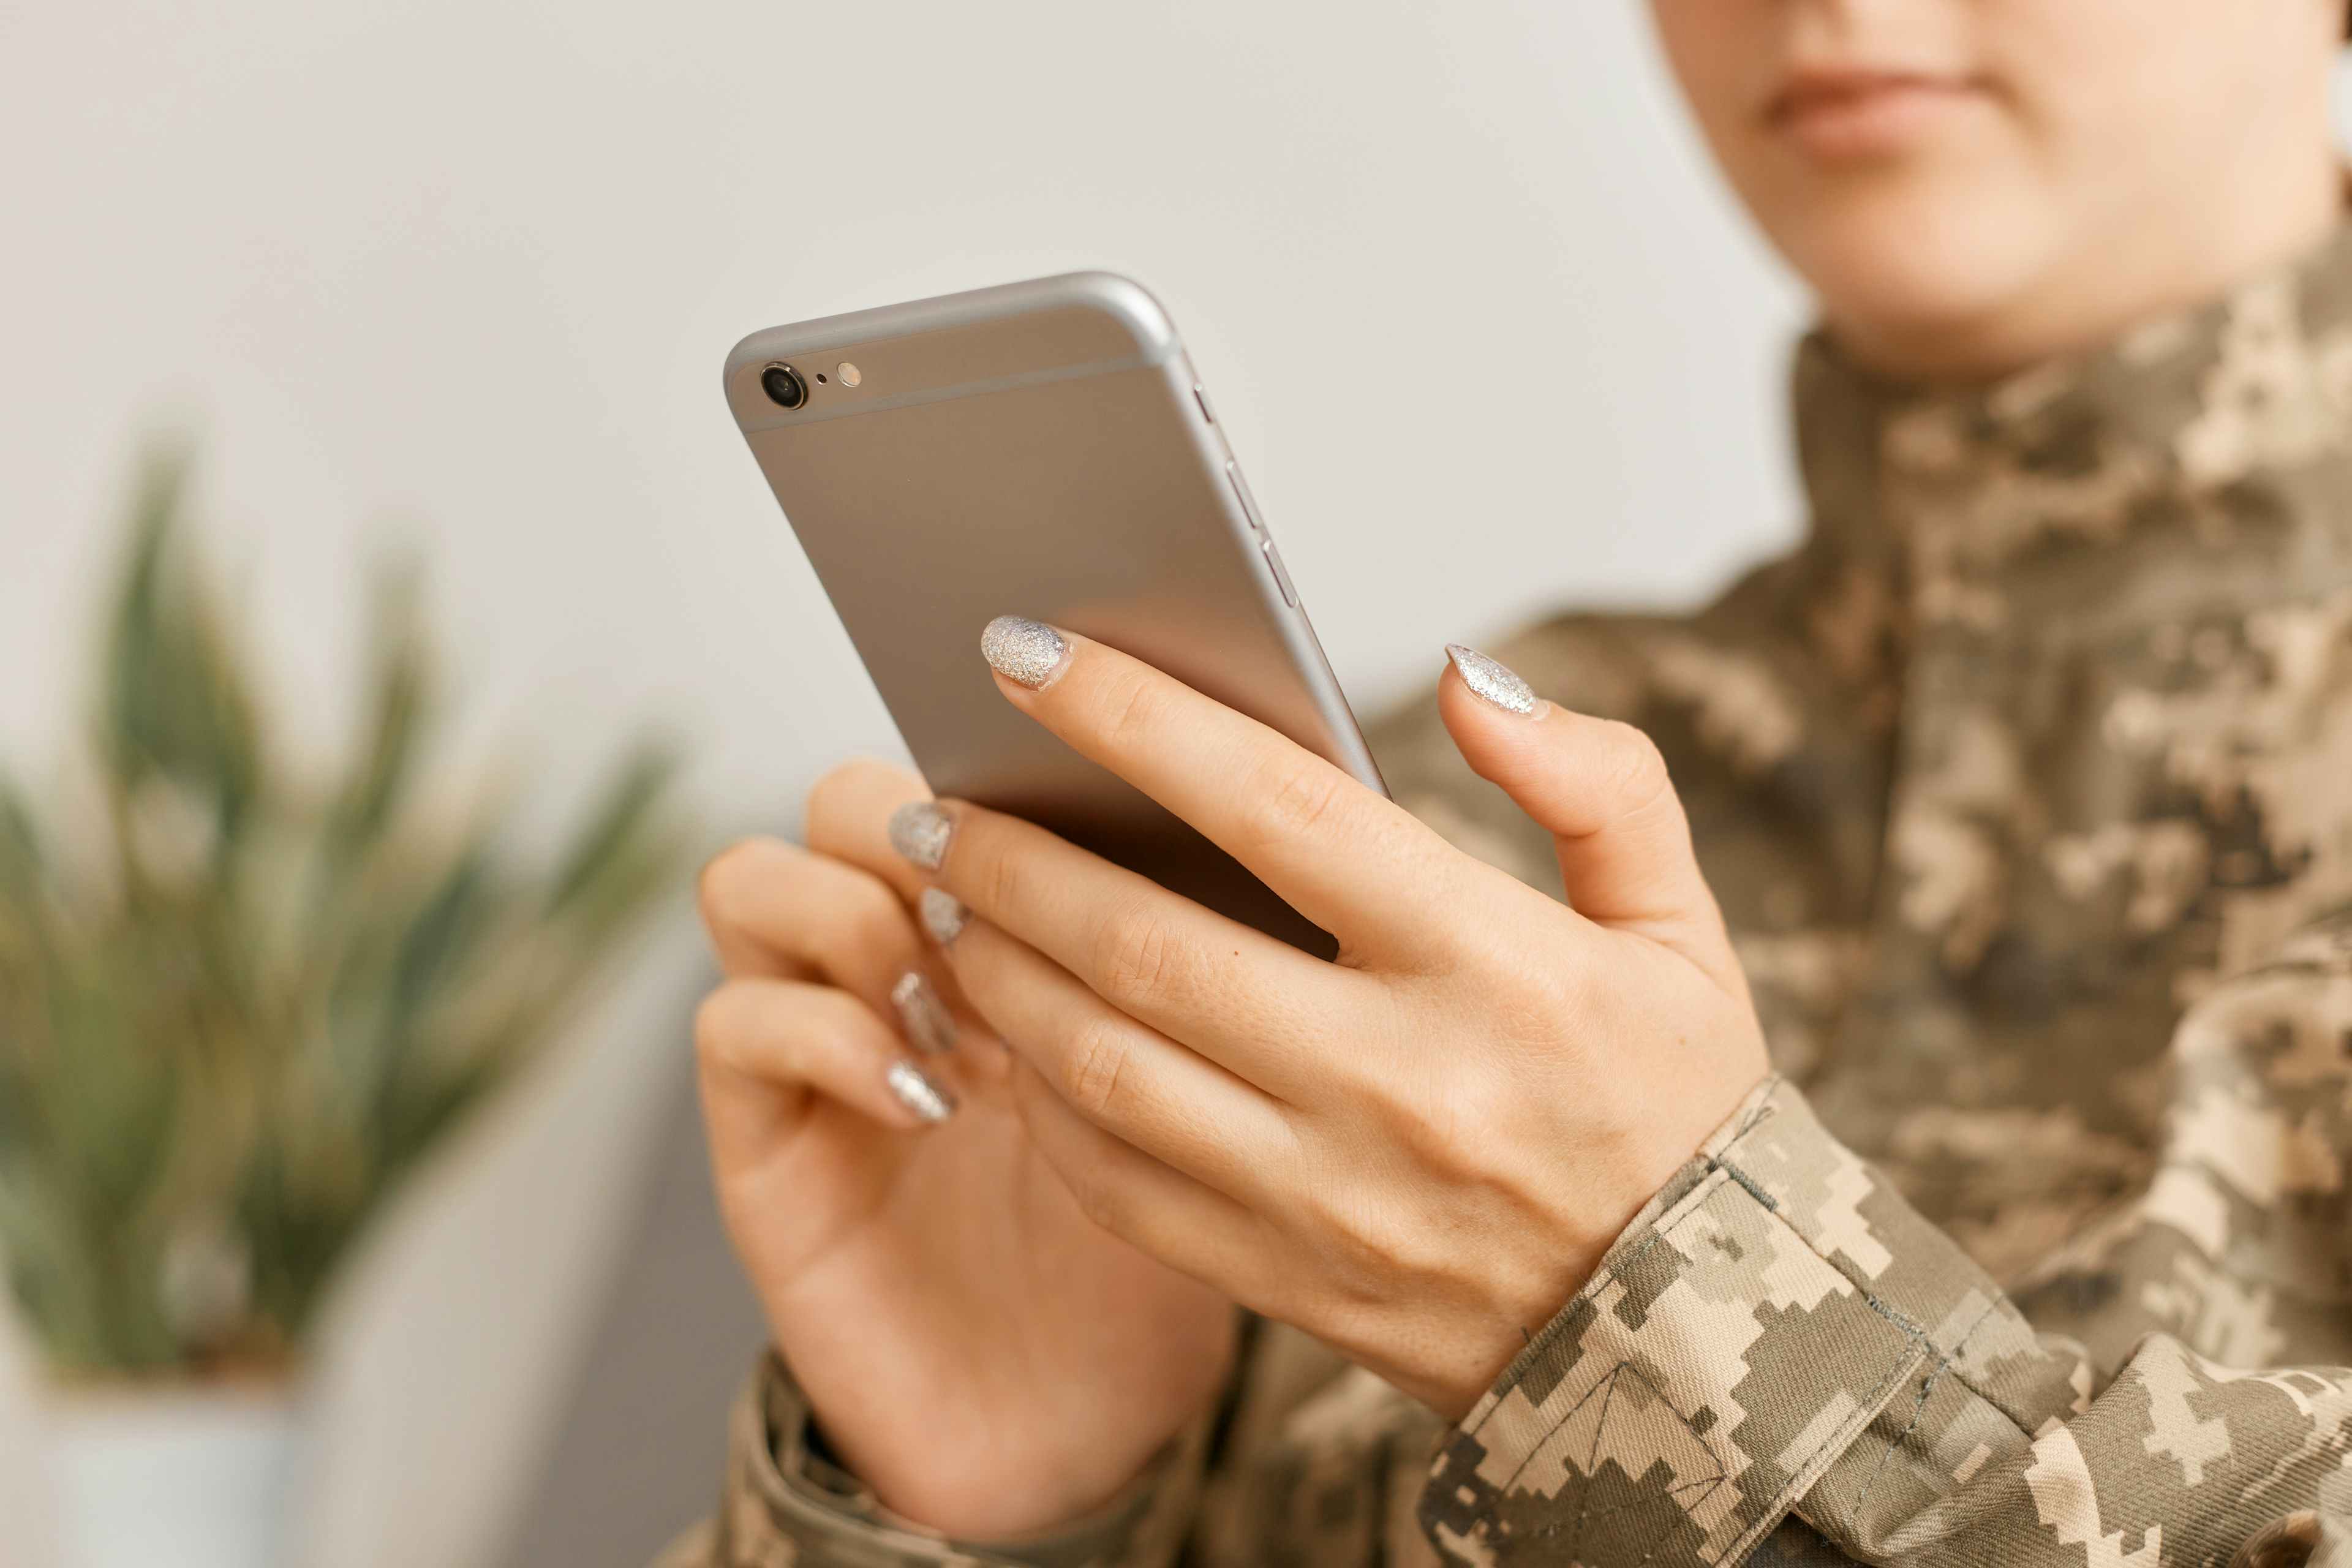 A woman wearing a military uniform, looking at a cell phone.